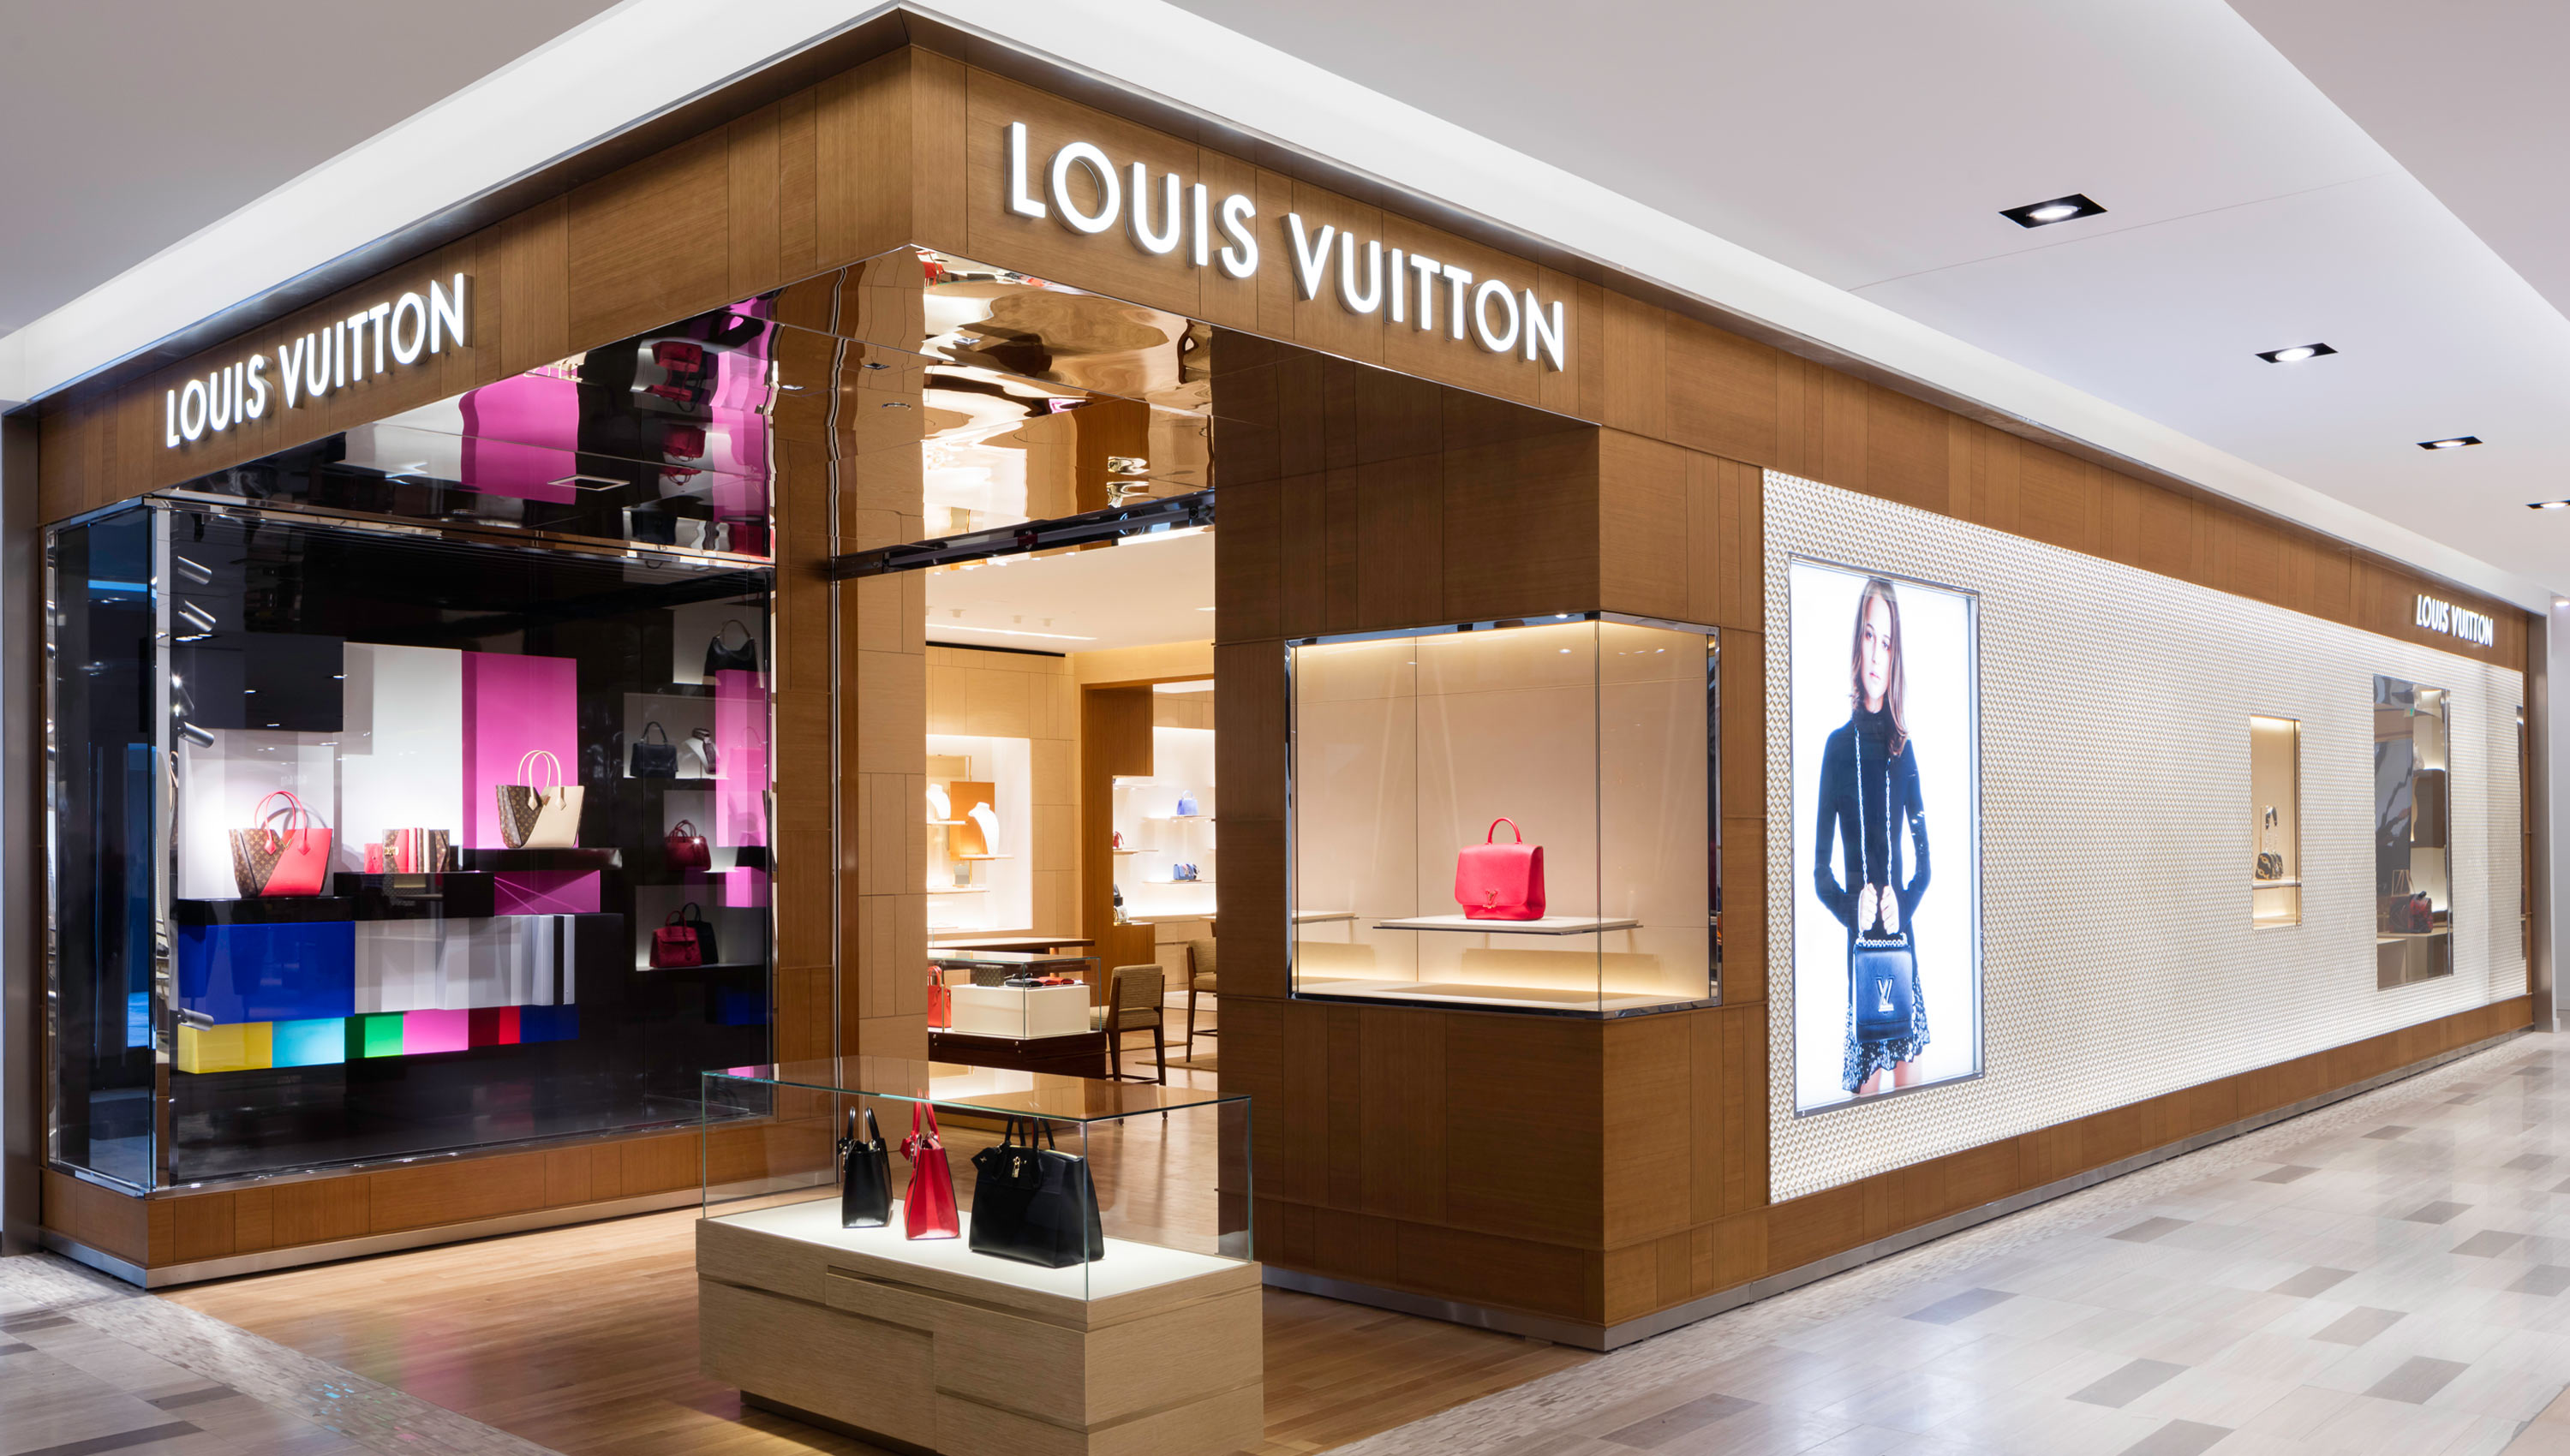 Louis Vuitton to bring 500 jobs to Keene, Texas, for manufacturing